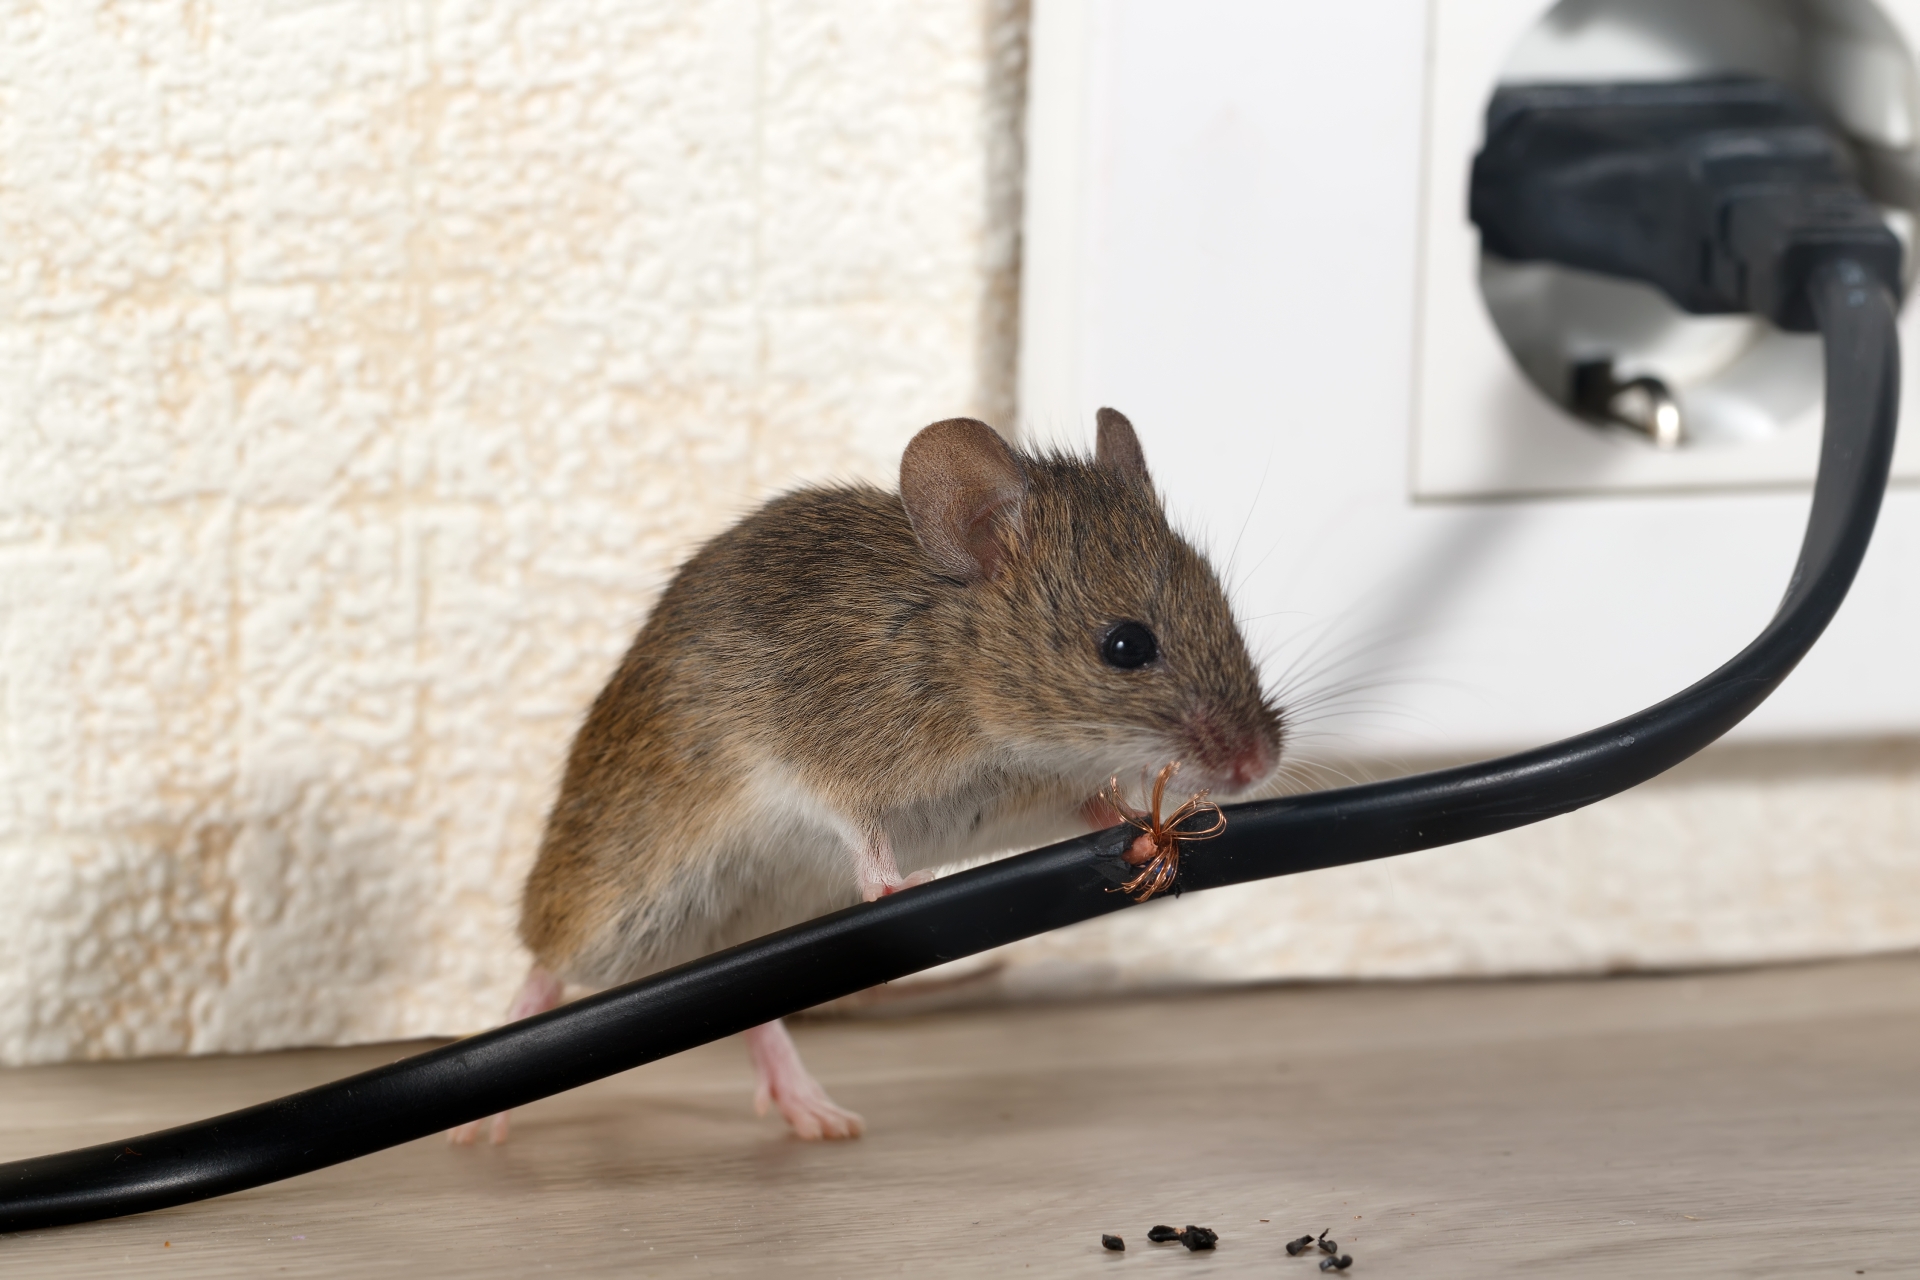 Mice Infestation, Pest Control in Elephant & Castle, SE17. Call Now 020 8166 9746